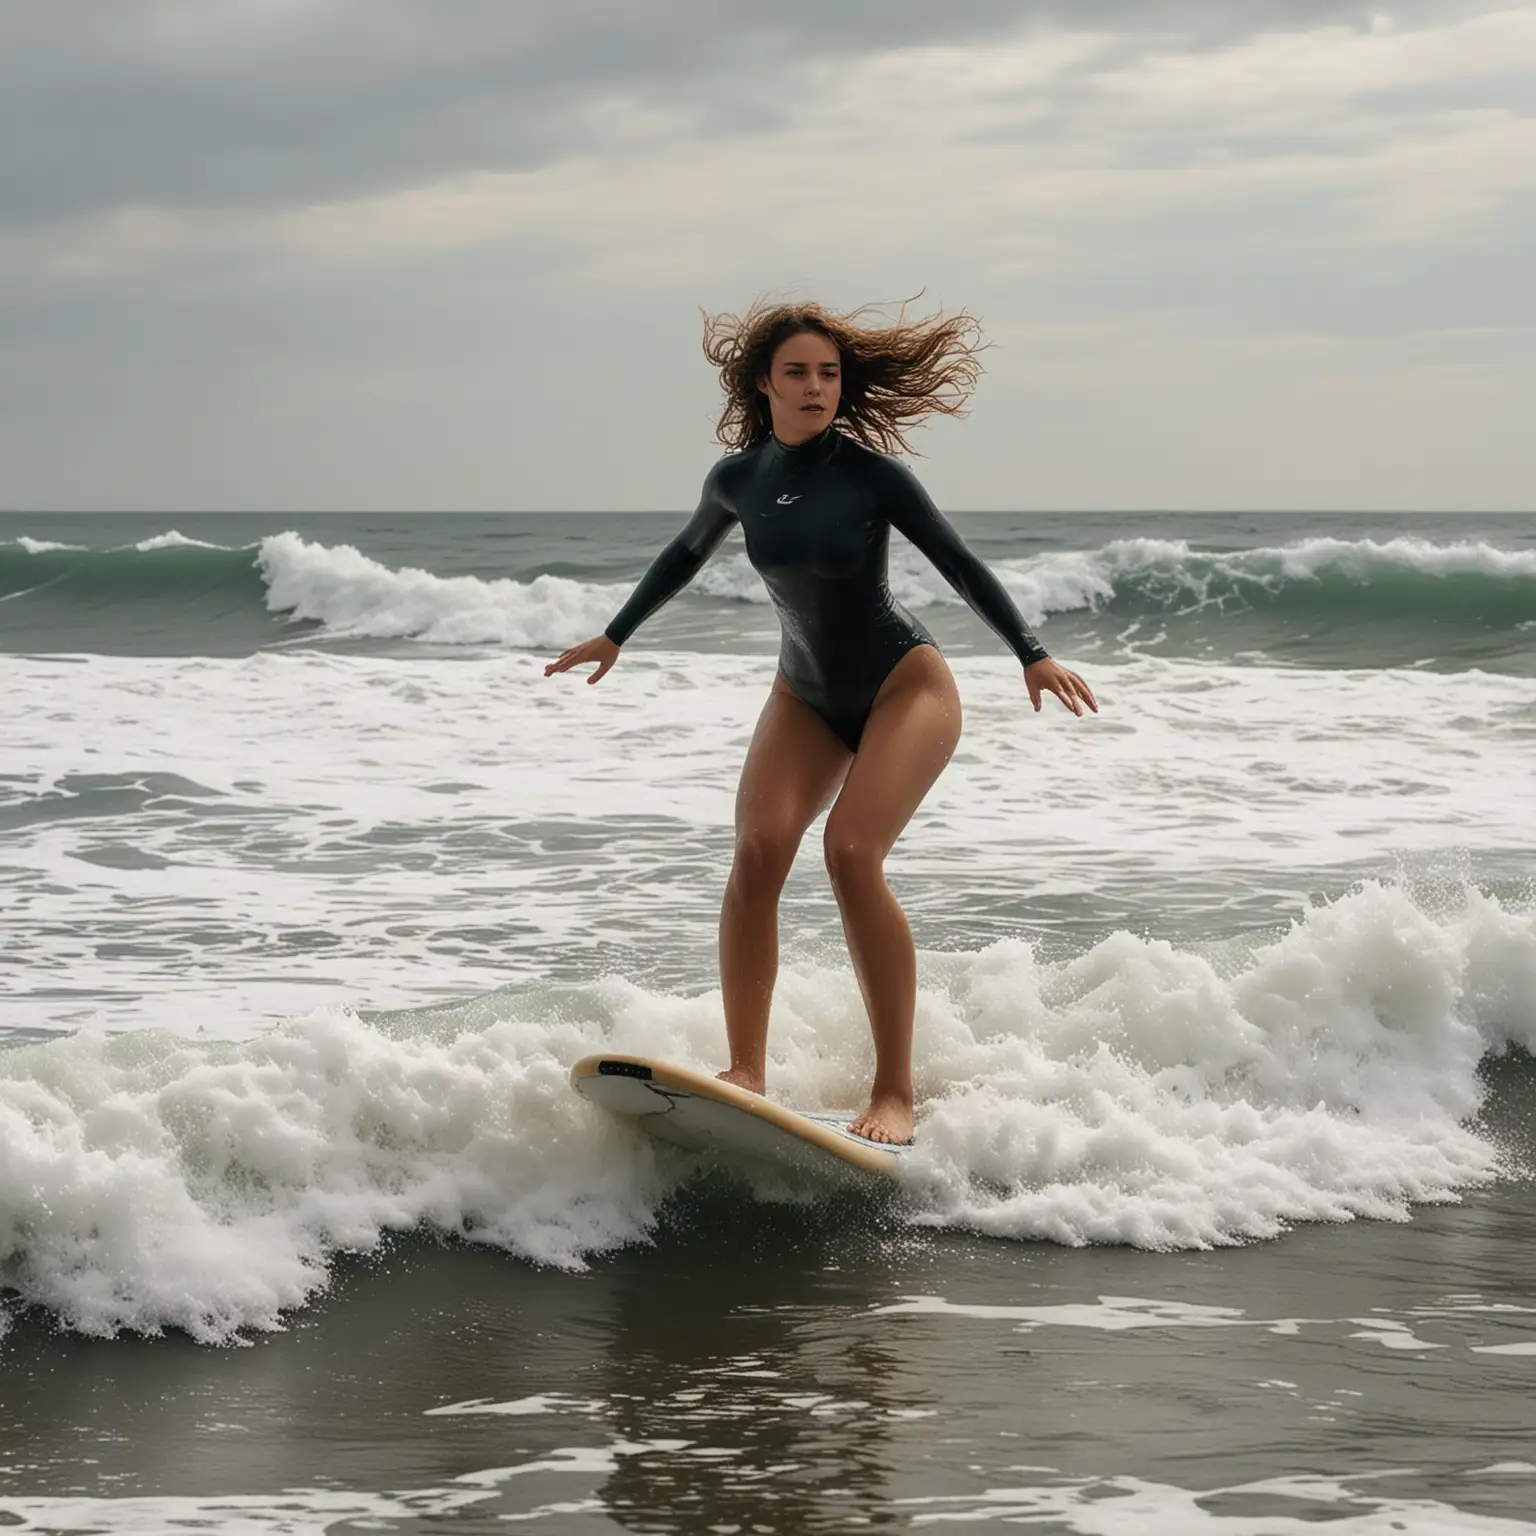 surge of the sea, a young woman steps on a surfboard, dancing with huge waves